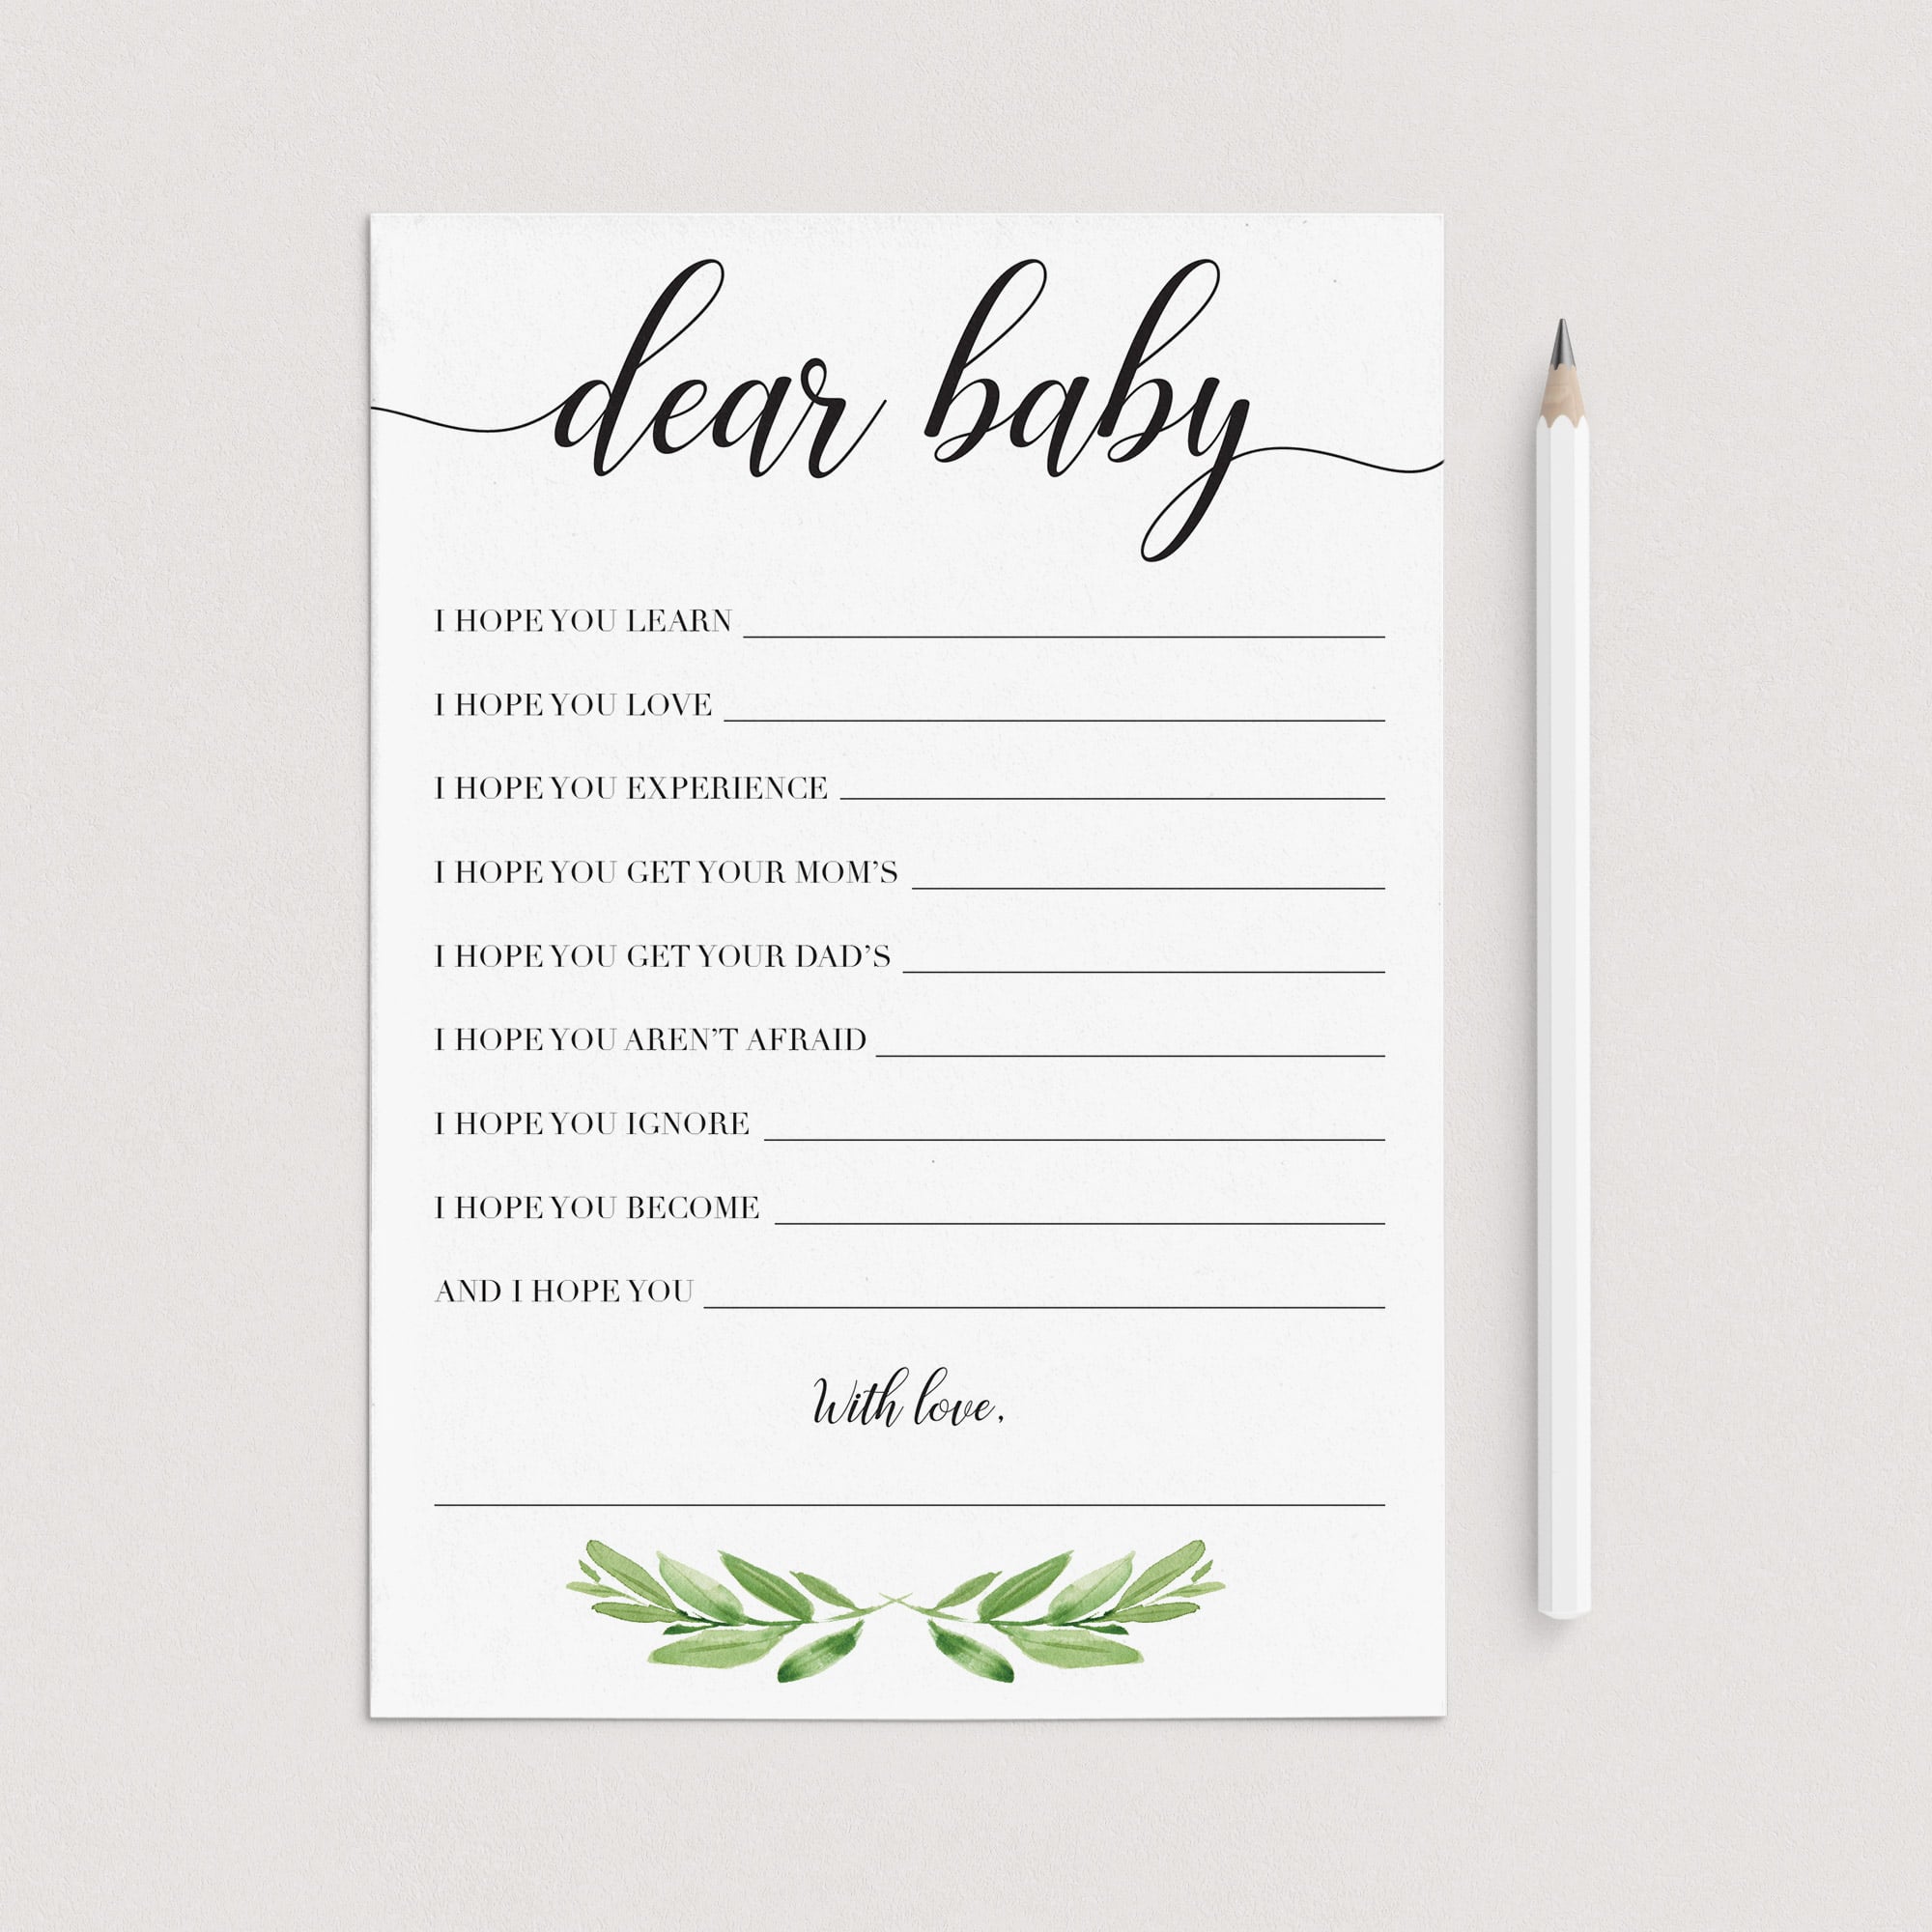 Dear baby wishes cards printable greenery by LittleSizzle